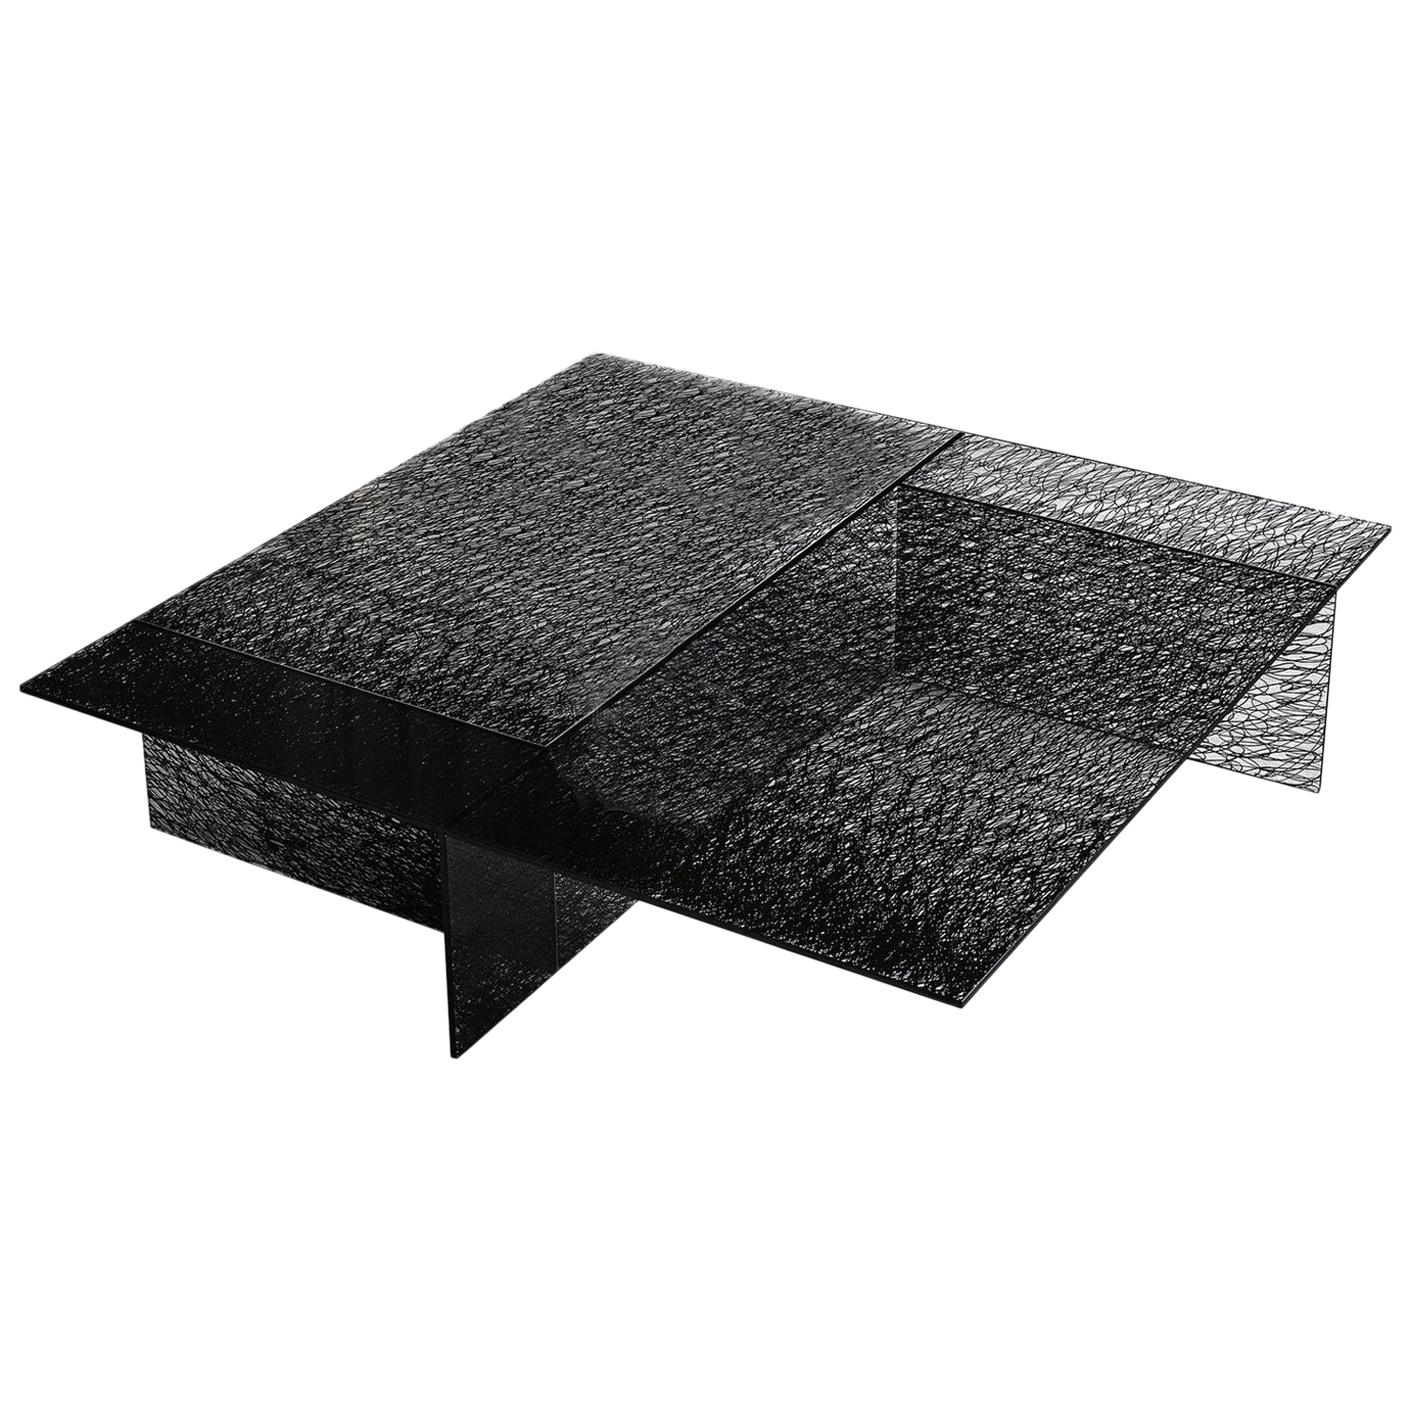 In Stock in Los Angeles, Sestante Black Glass Coffee Table, Made in Italy